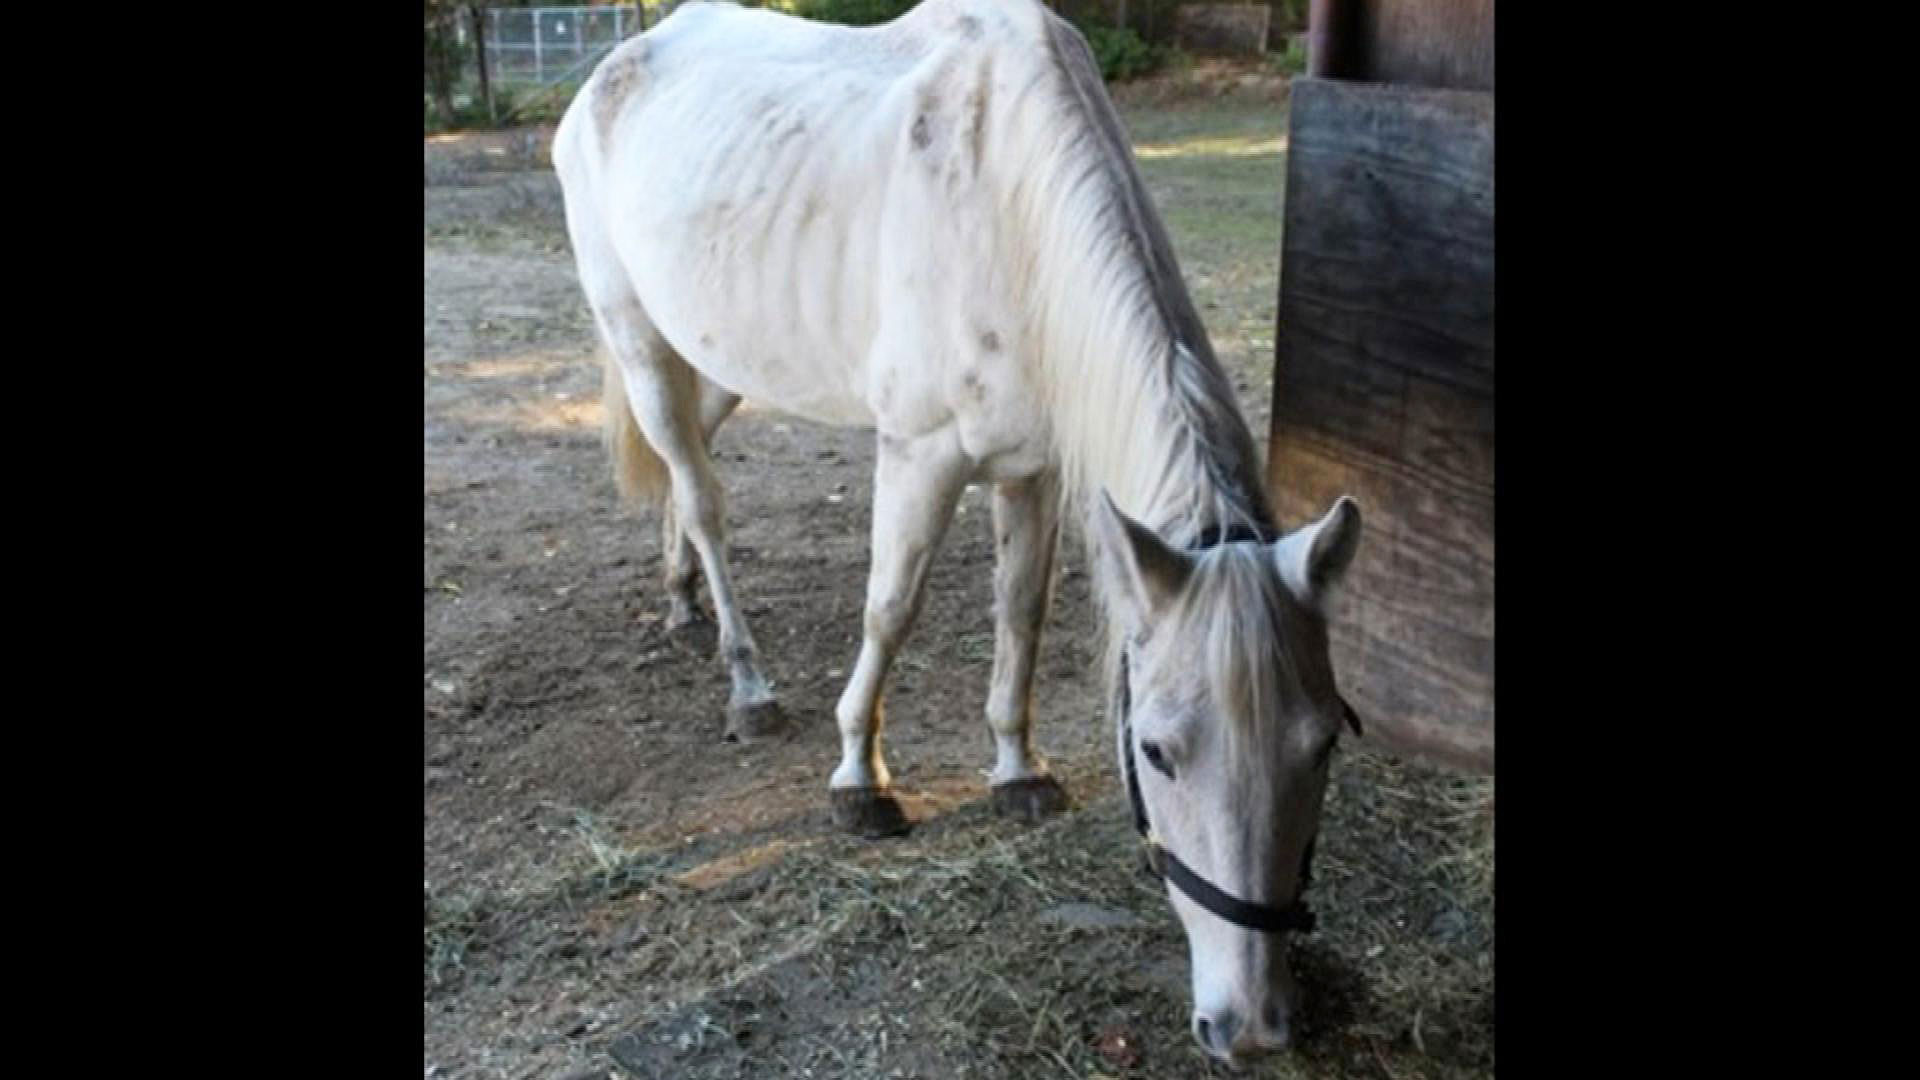 A malnourished horse was rescued from a Derry, New Hampshire home on Oct. 16, police say. (Photo Credit: Derry Police Department)